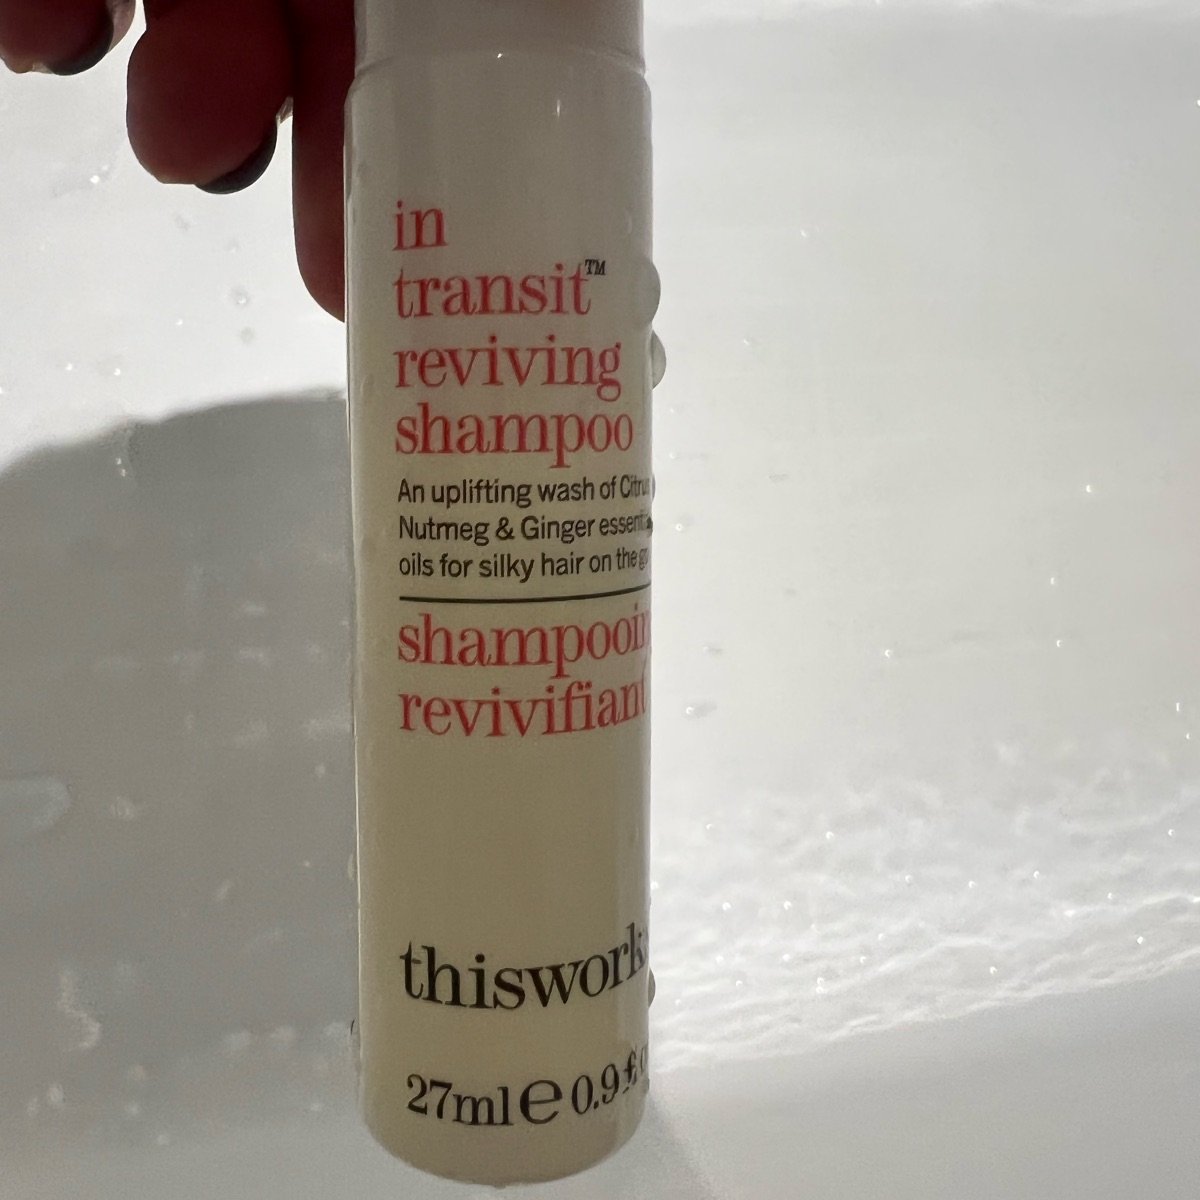 Thisworks In Transit Reviving Shampoo Reviews | abillion